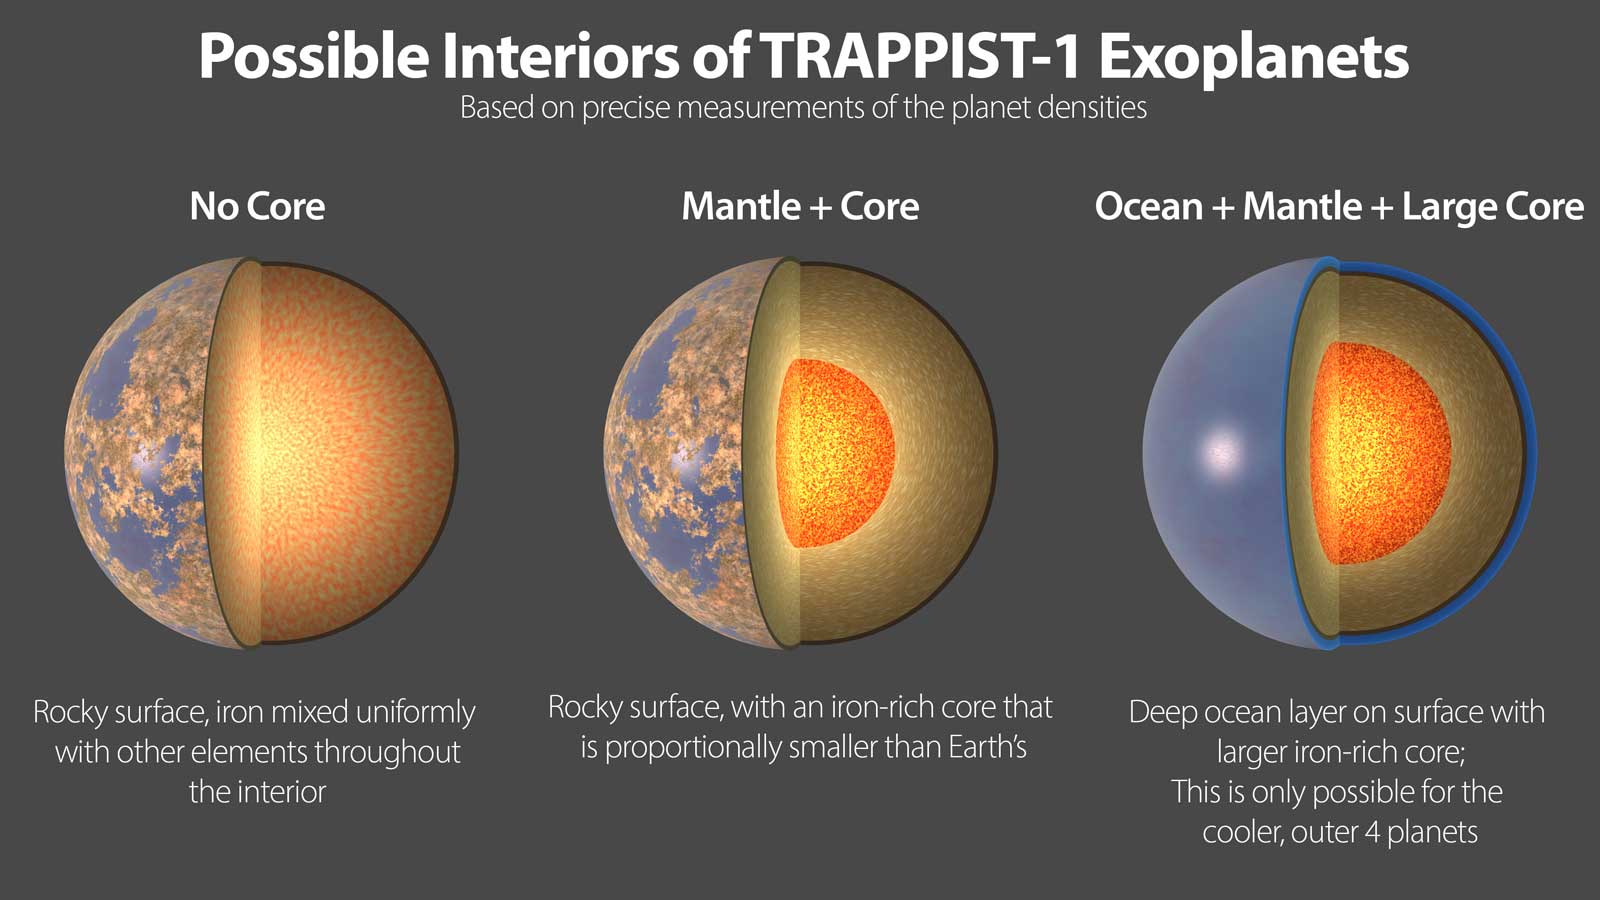 Possible interiors of TRAPPIST-1 planets